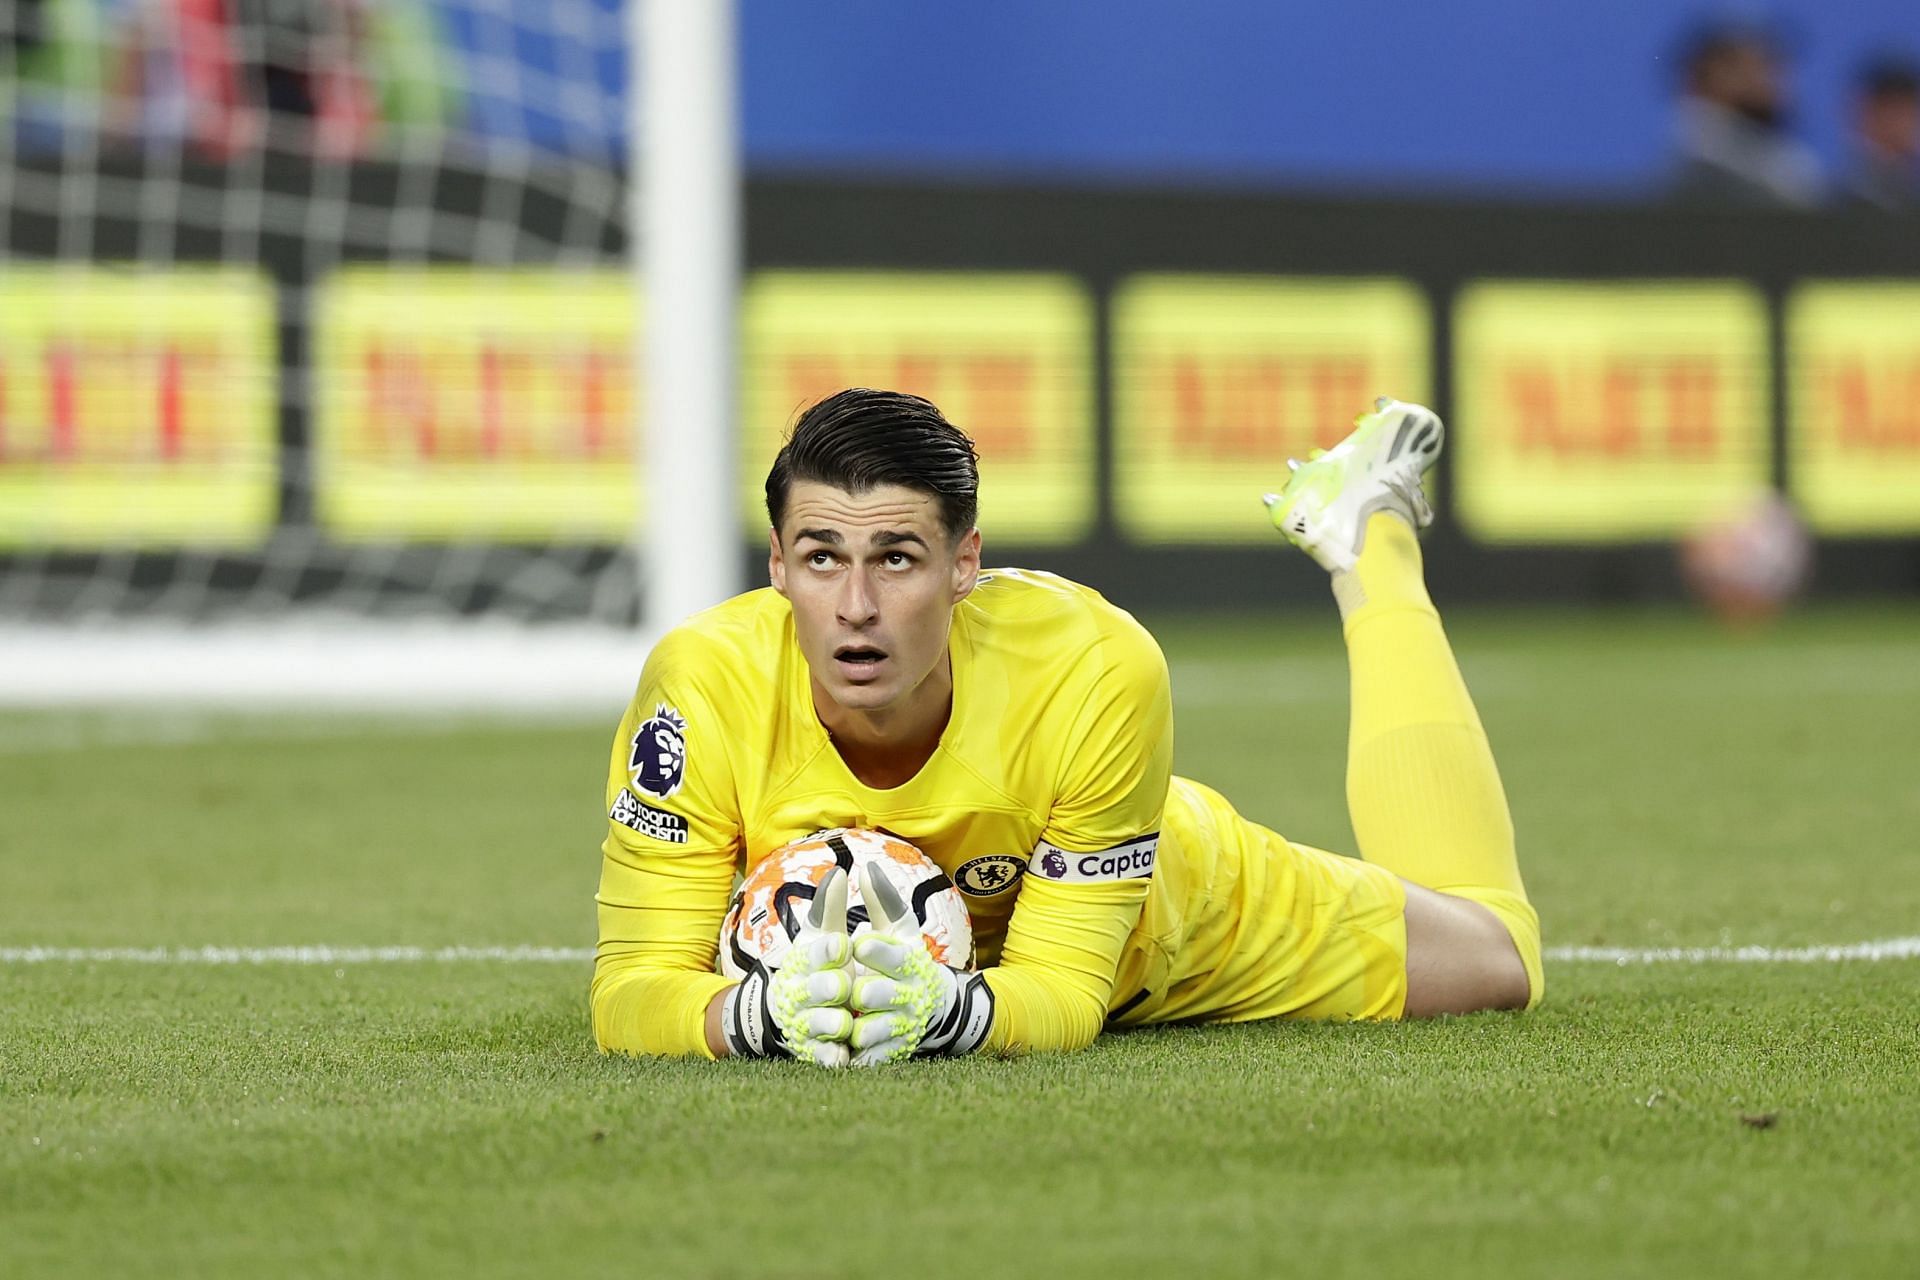 Kepa is the longest-serving member at Chelsea currently